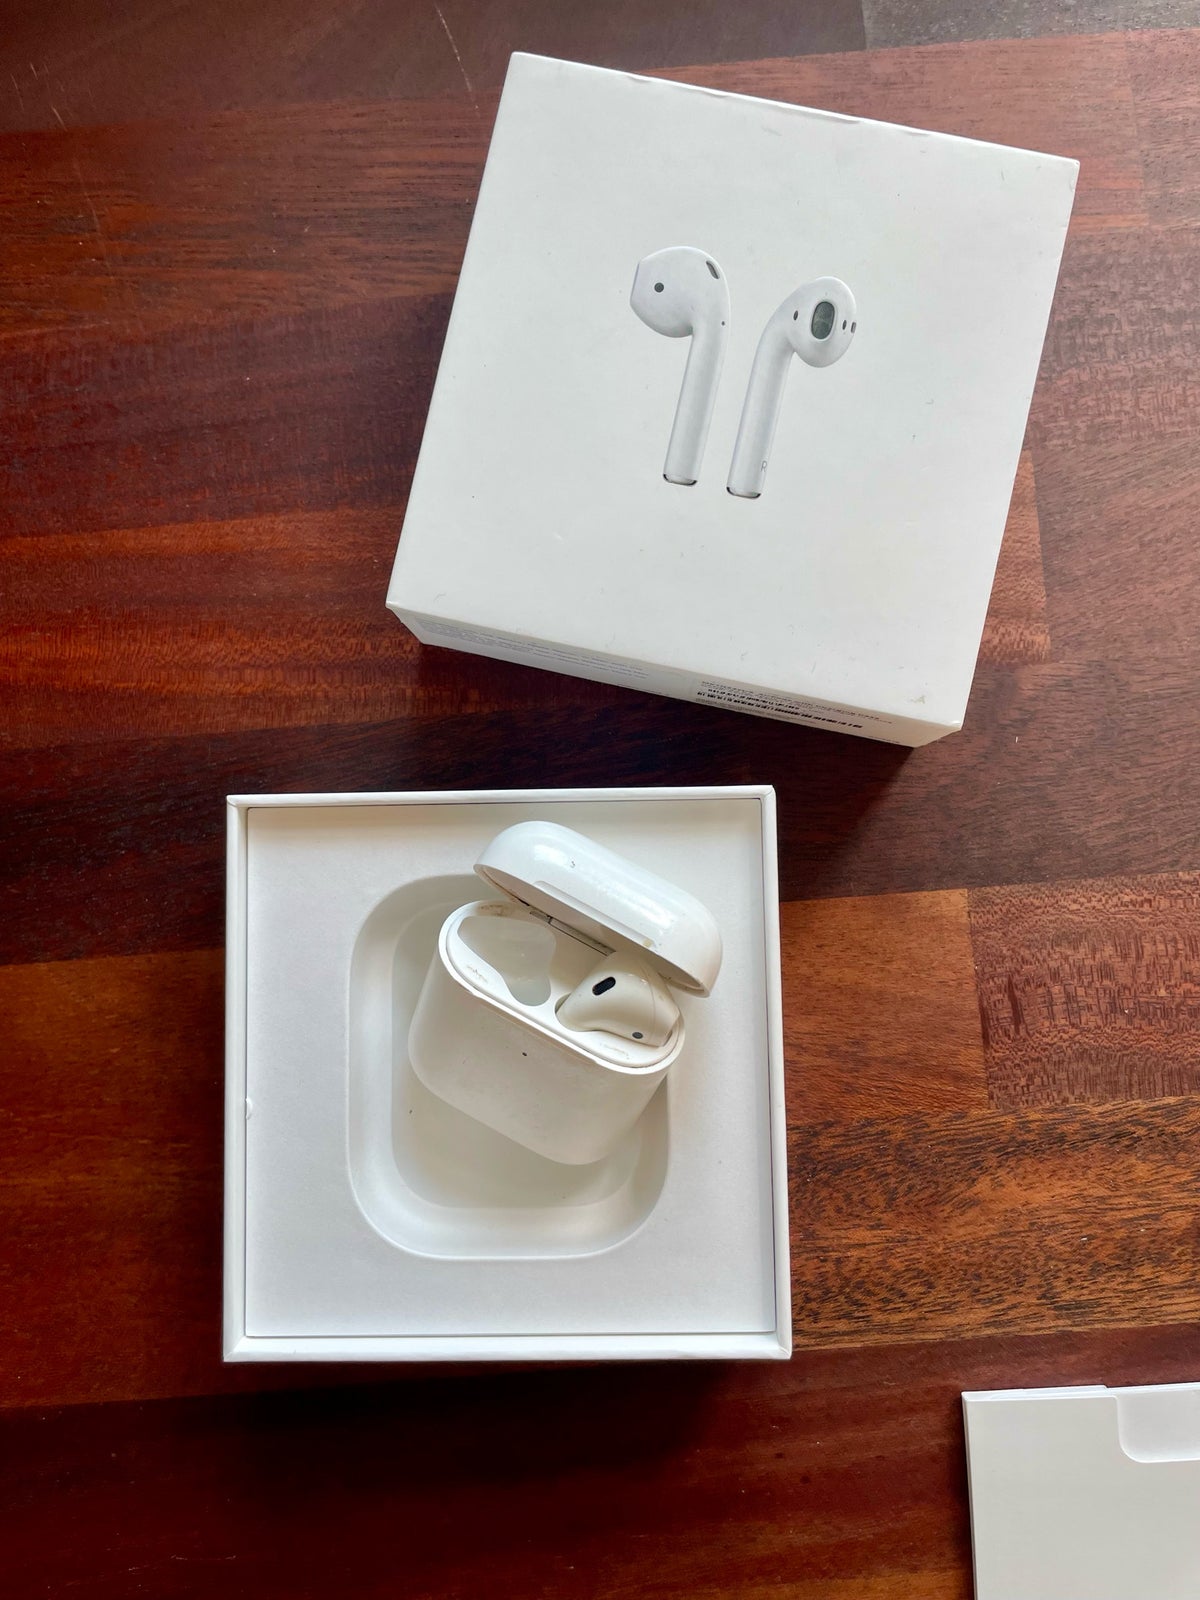 in-ear hovedtelefoner, Apple, AirPods charging case